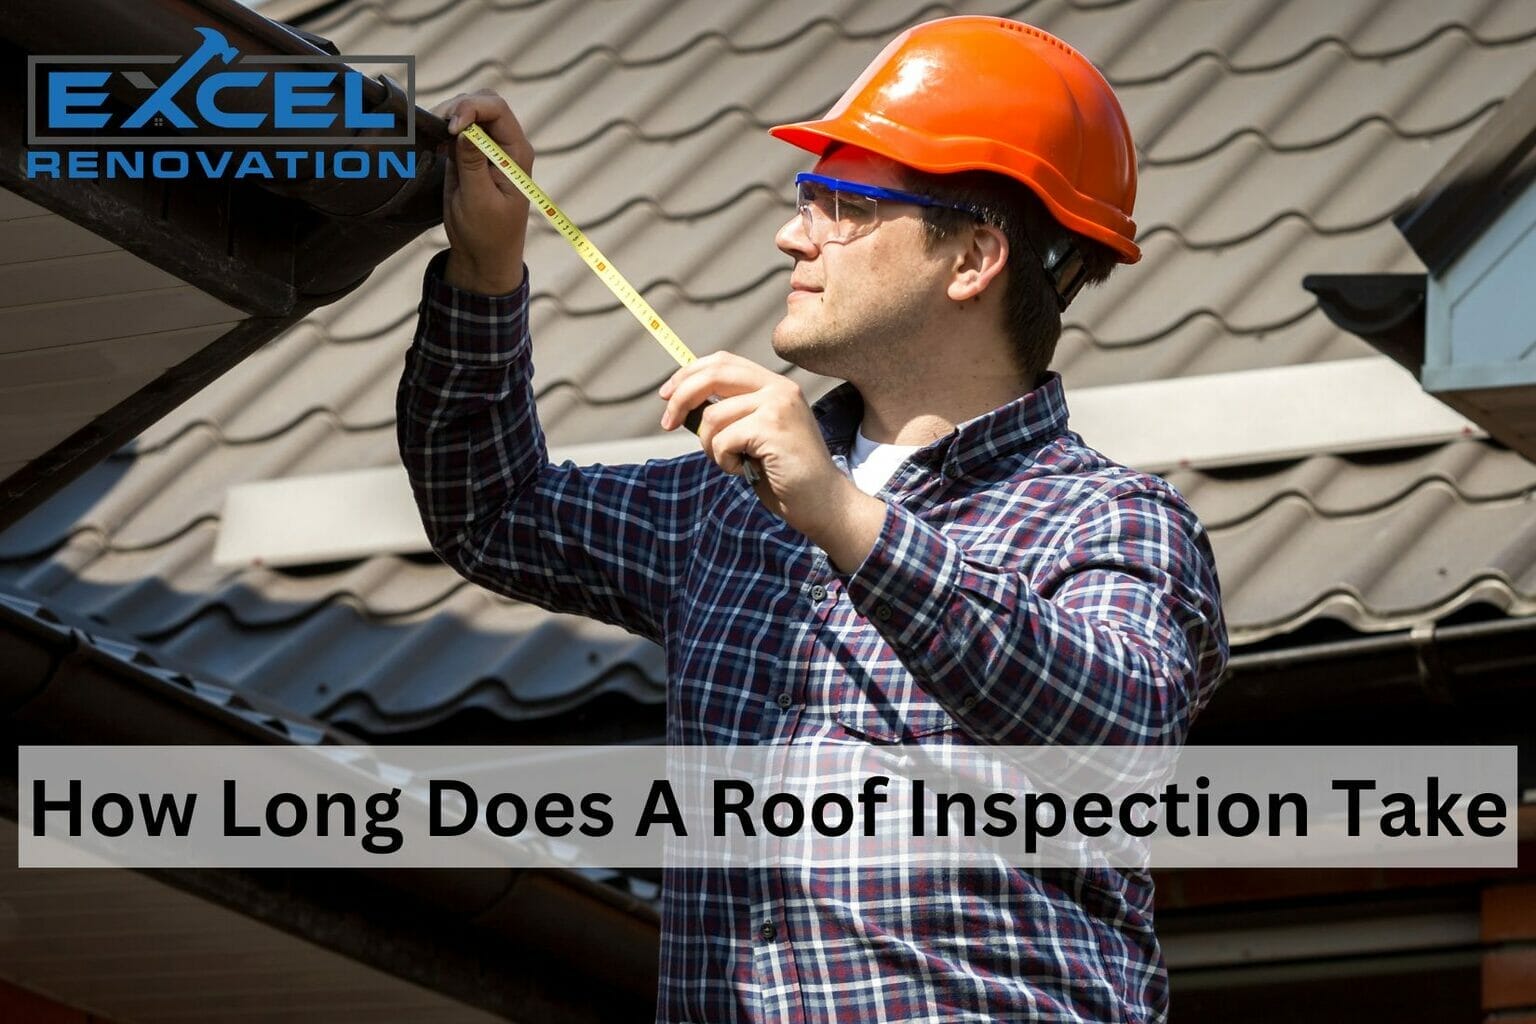 How Long Does A Roof Inspection Take?